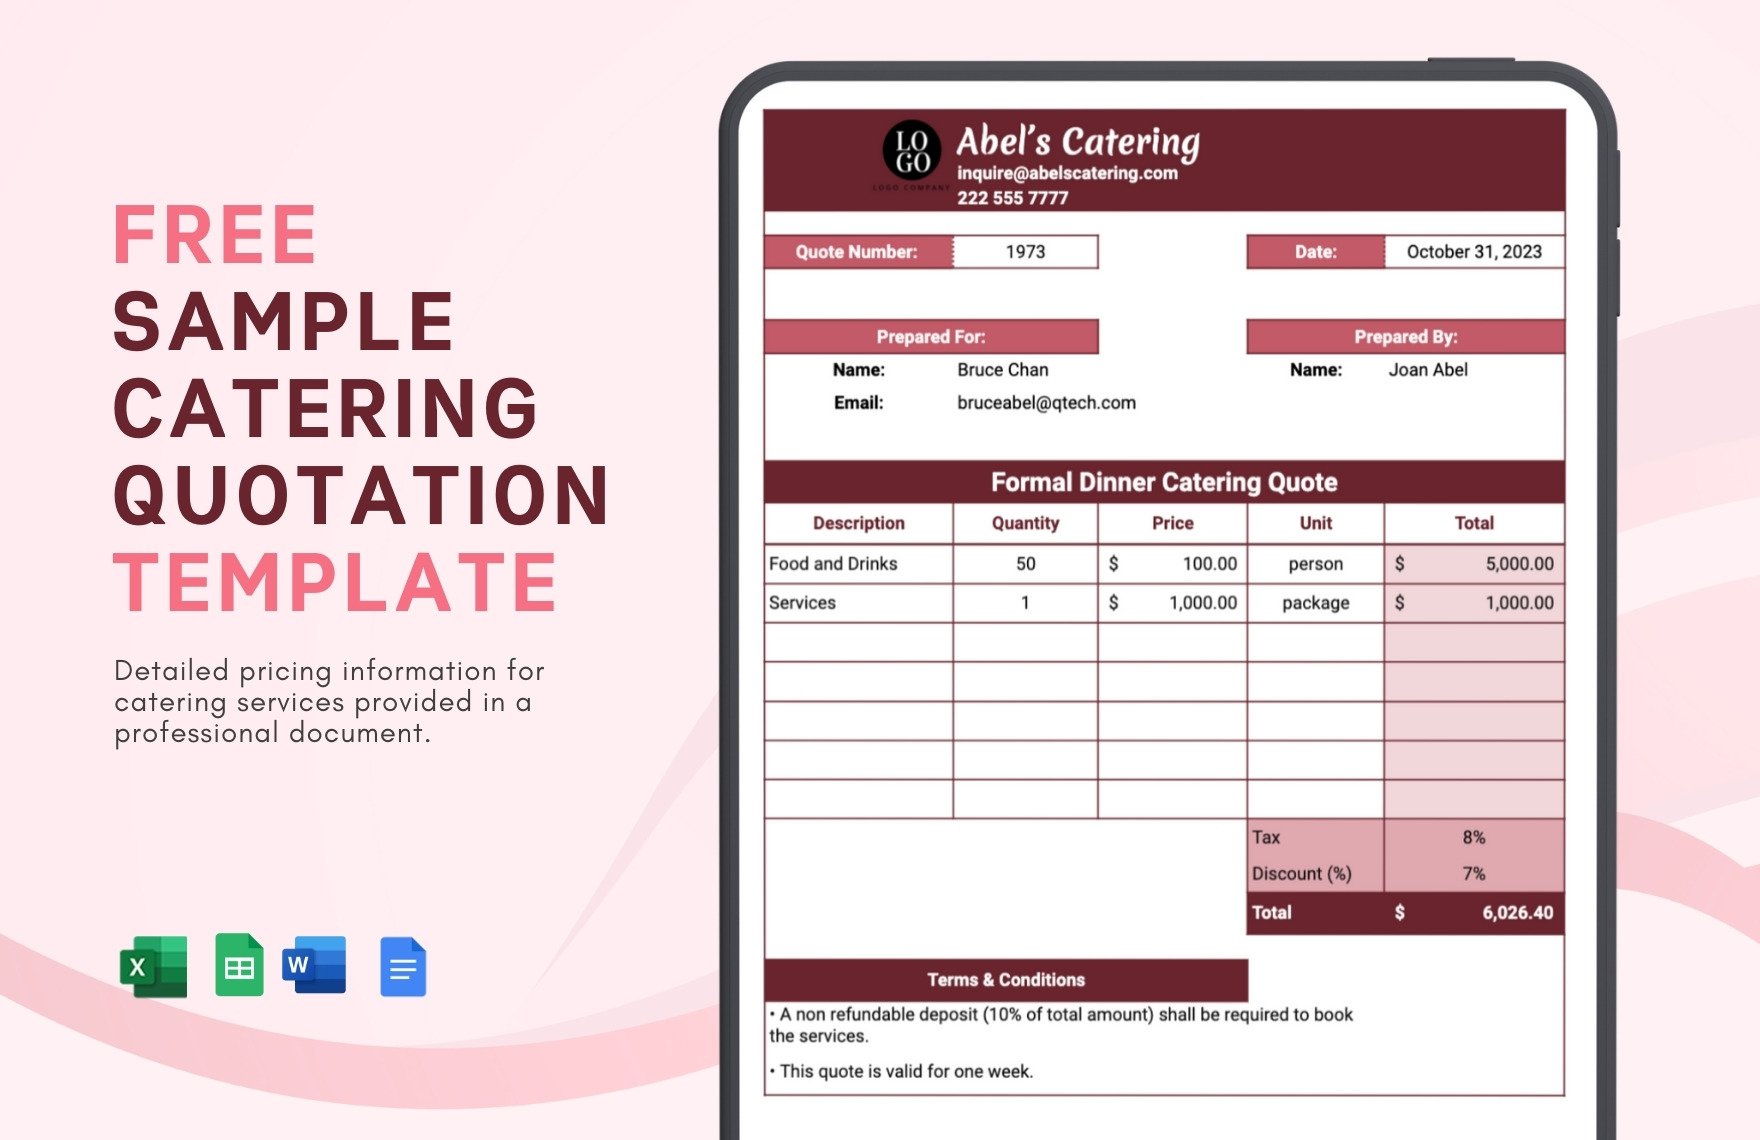 Sample Catering Quotation Template